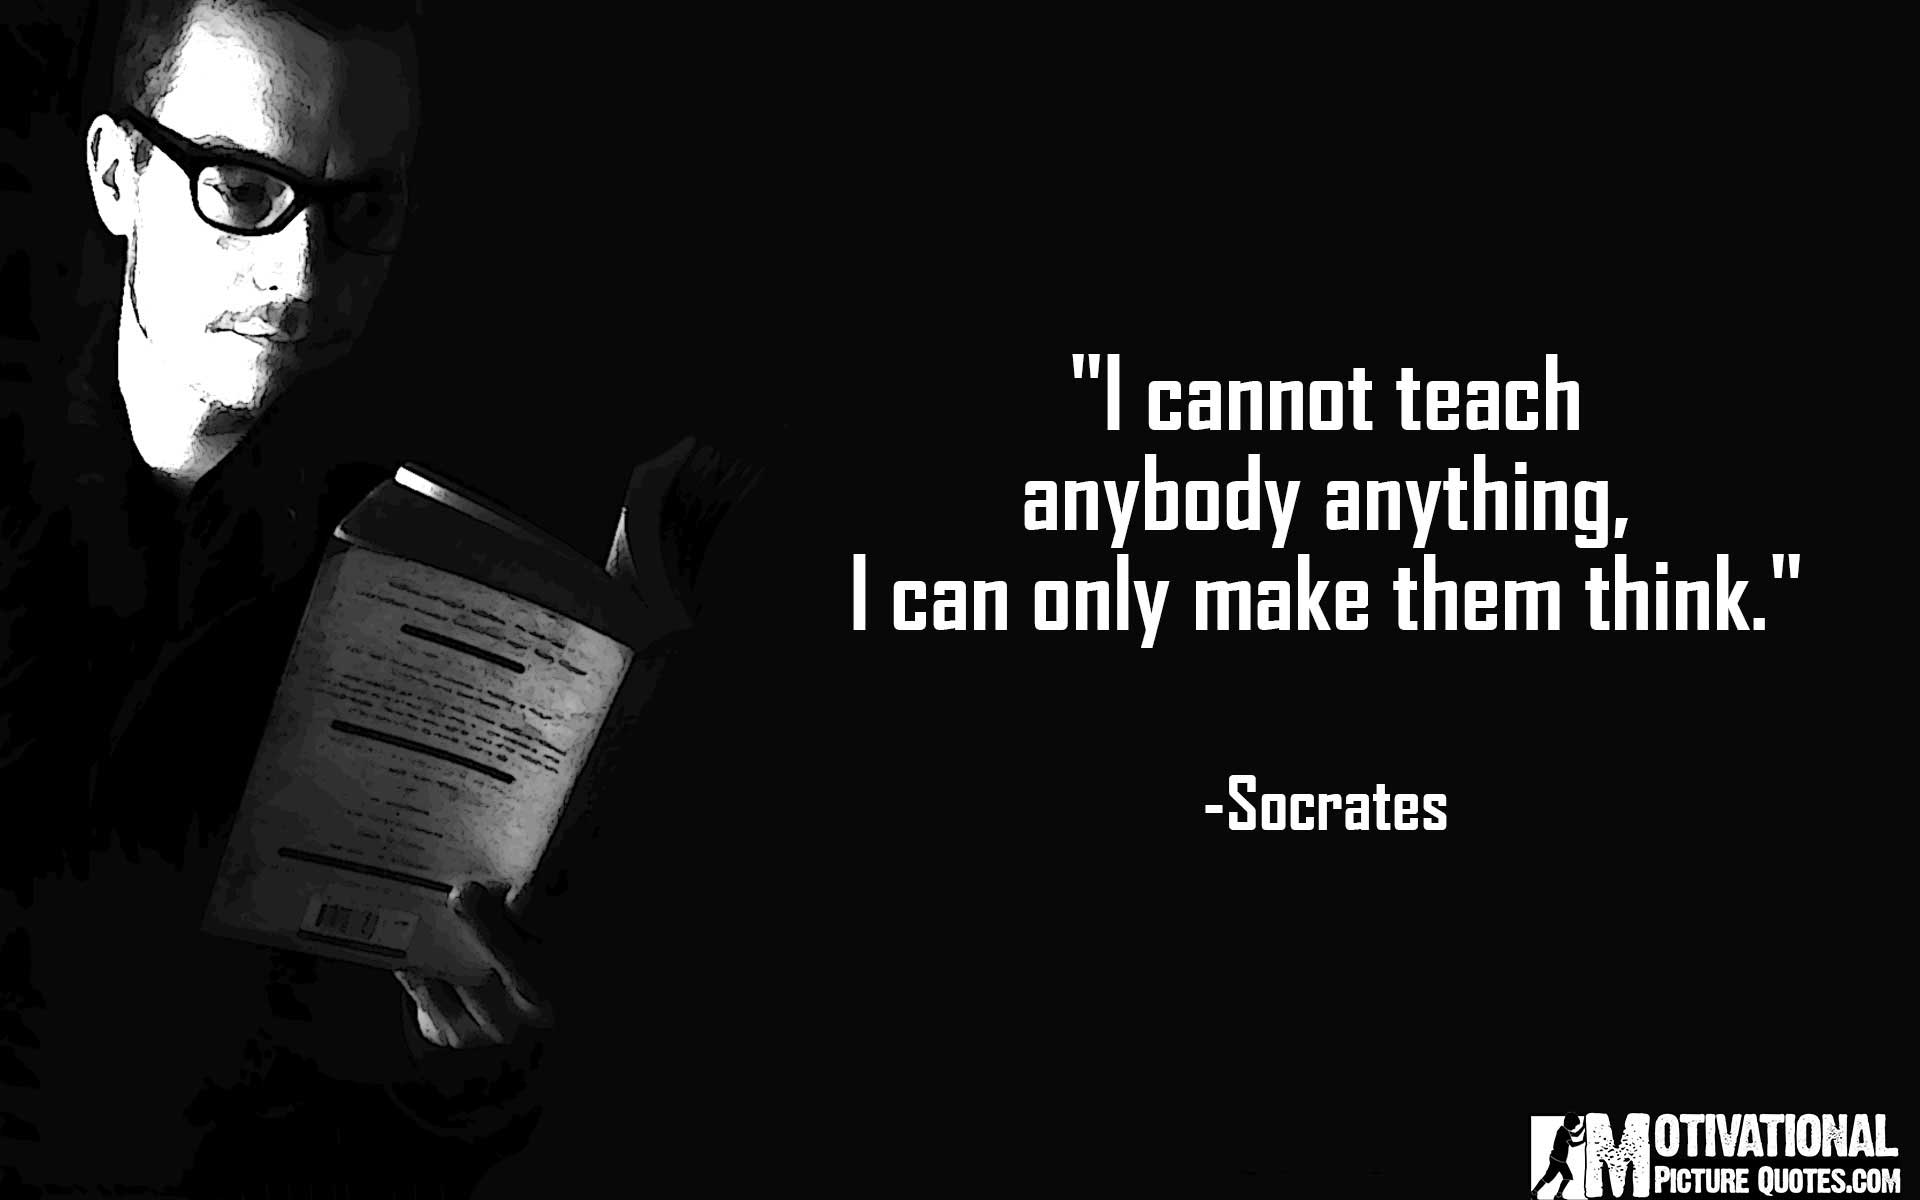 Inspirational Teacher Quotes Image. Teachers Day Quotes